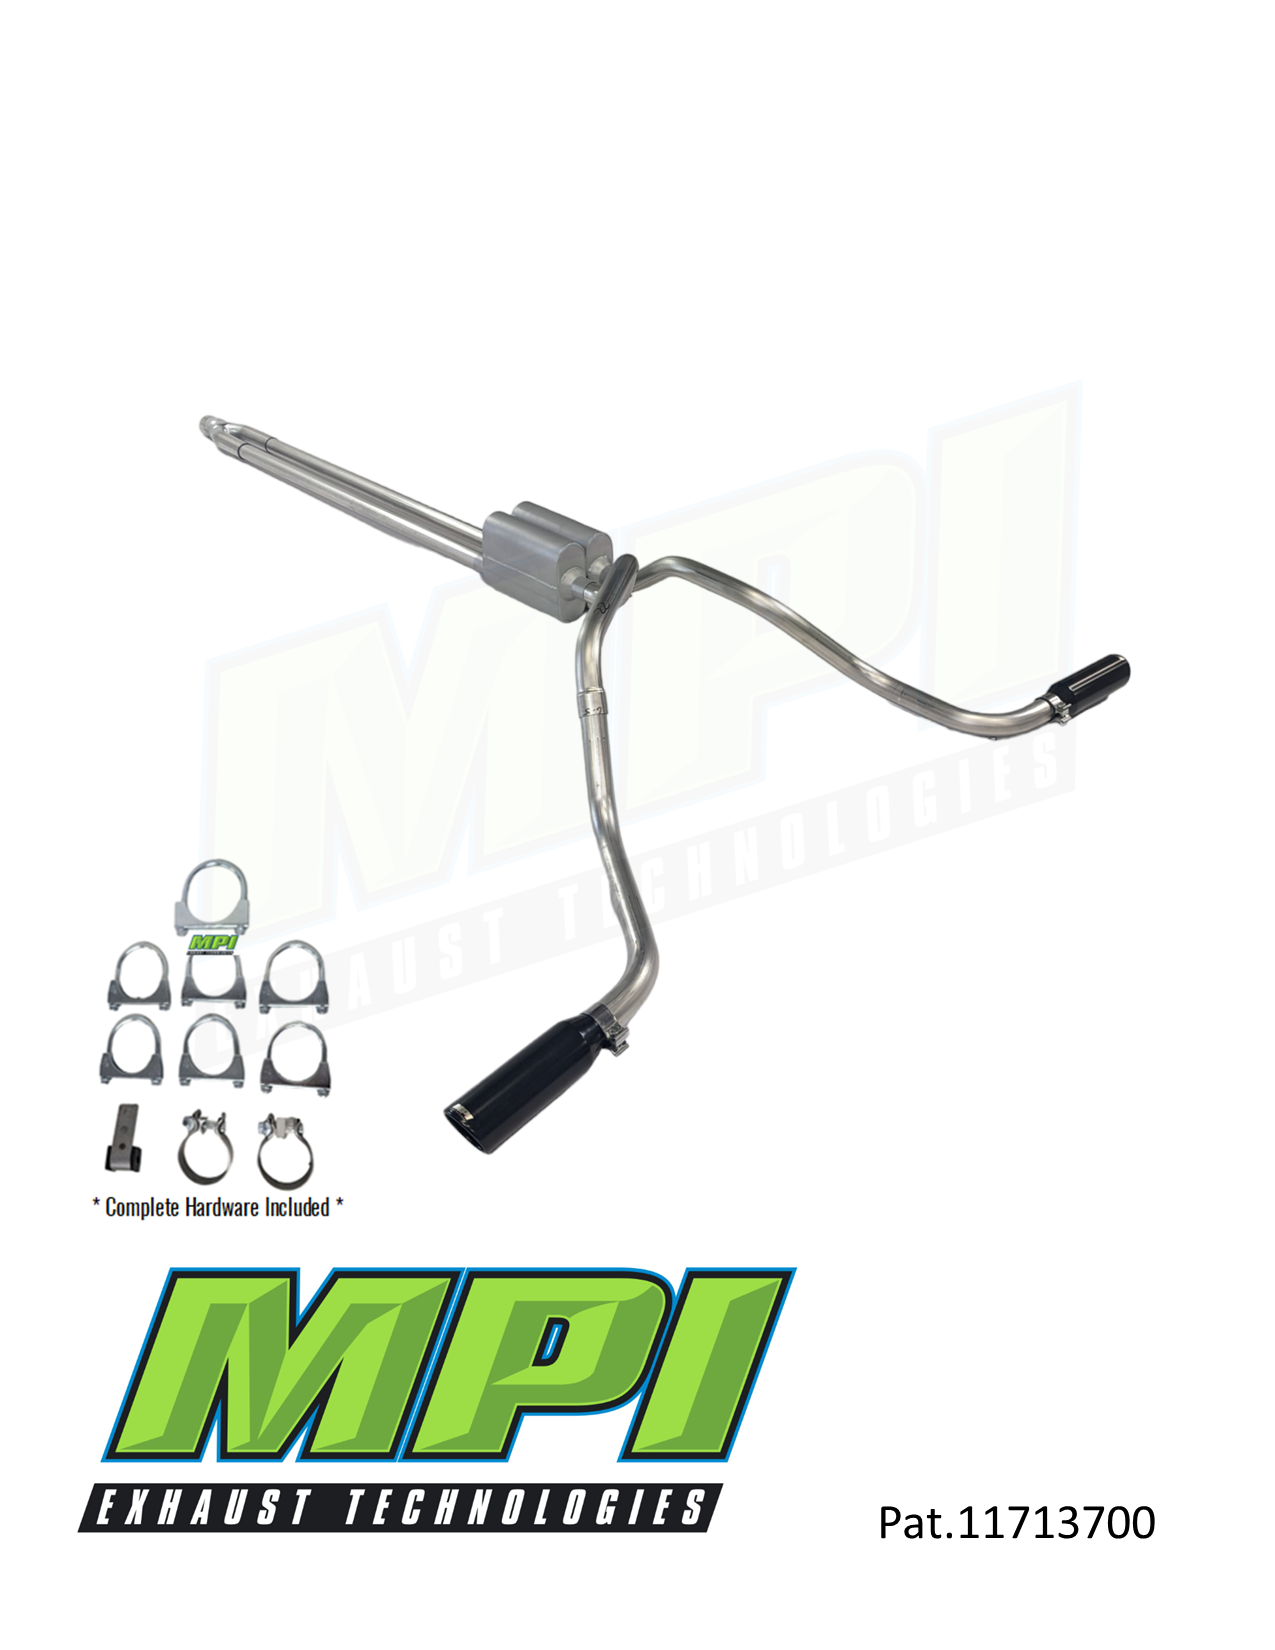 GM 5.3L 2014-2018 Truck Dual Exhaust Kits - Clamp-on